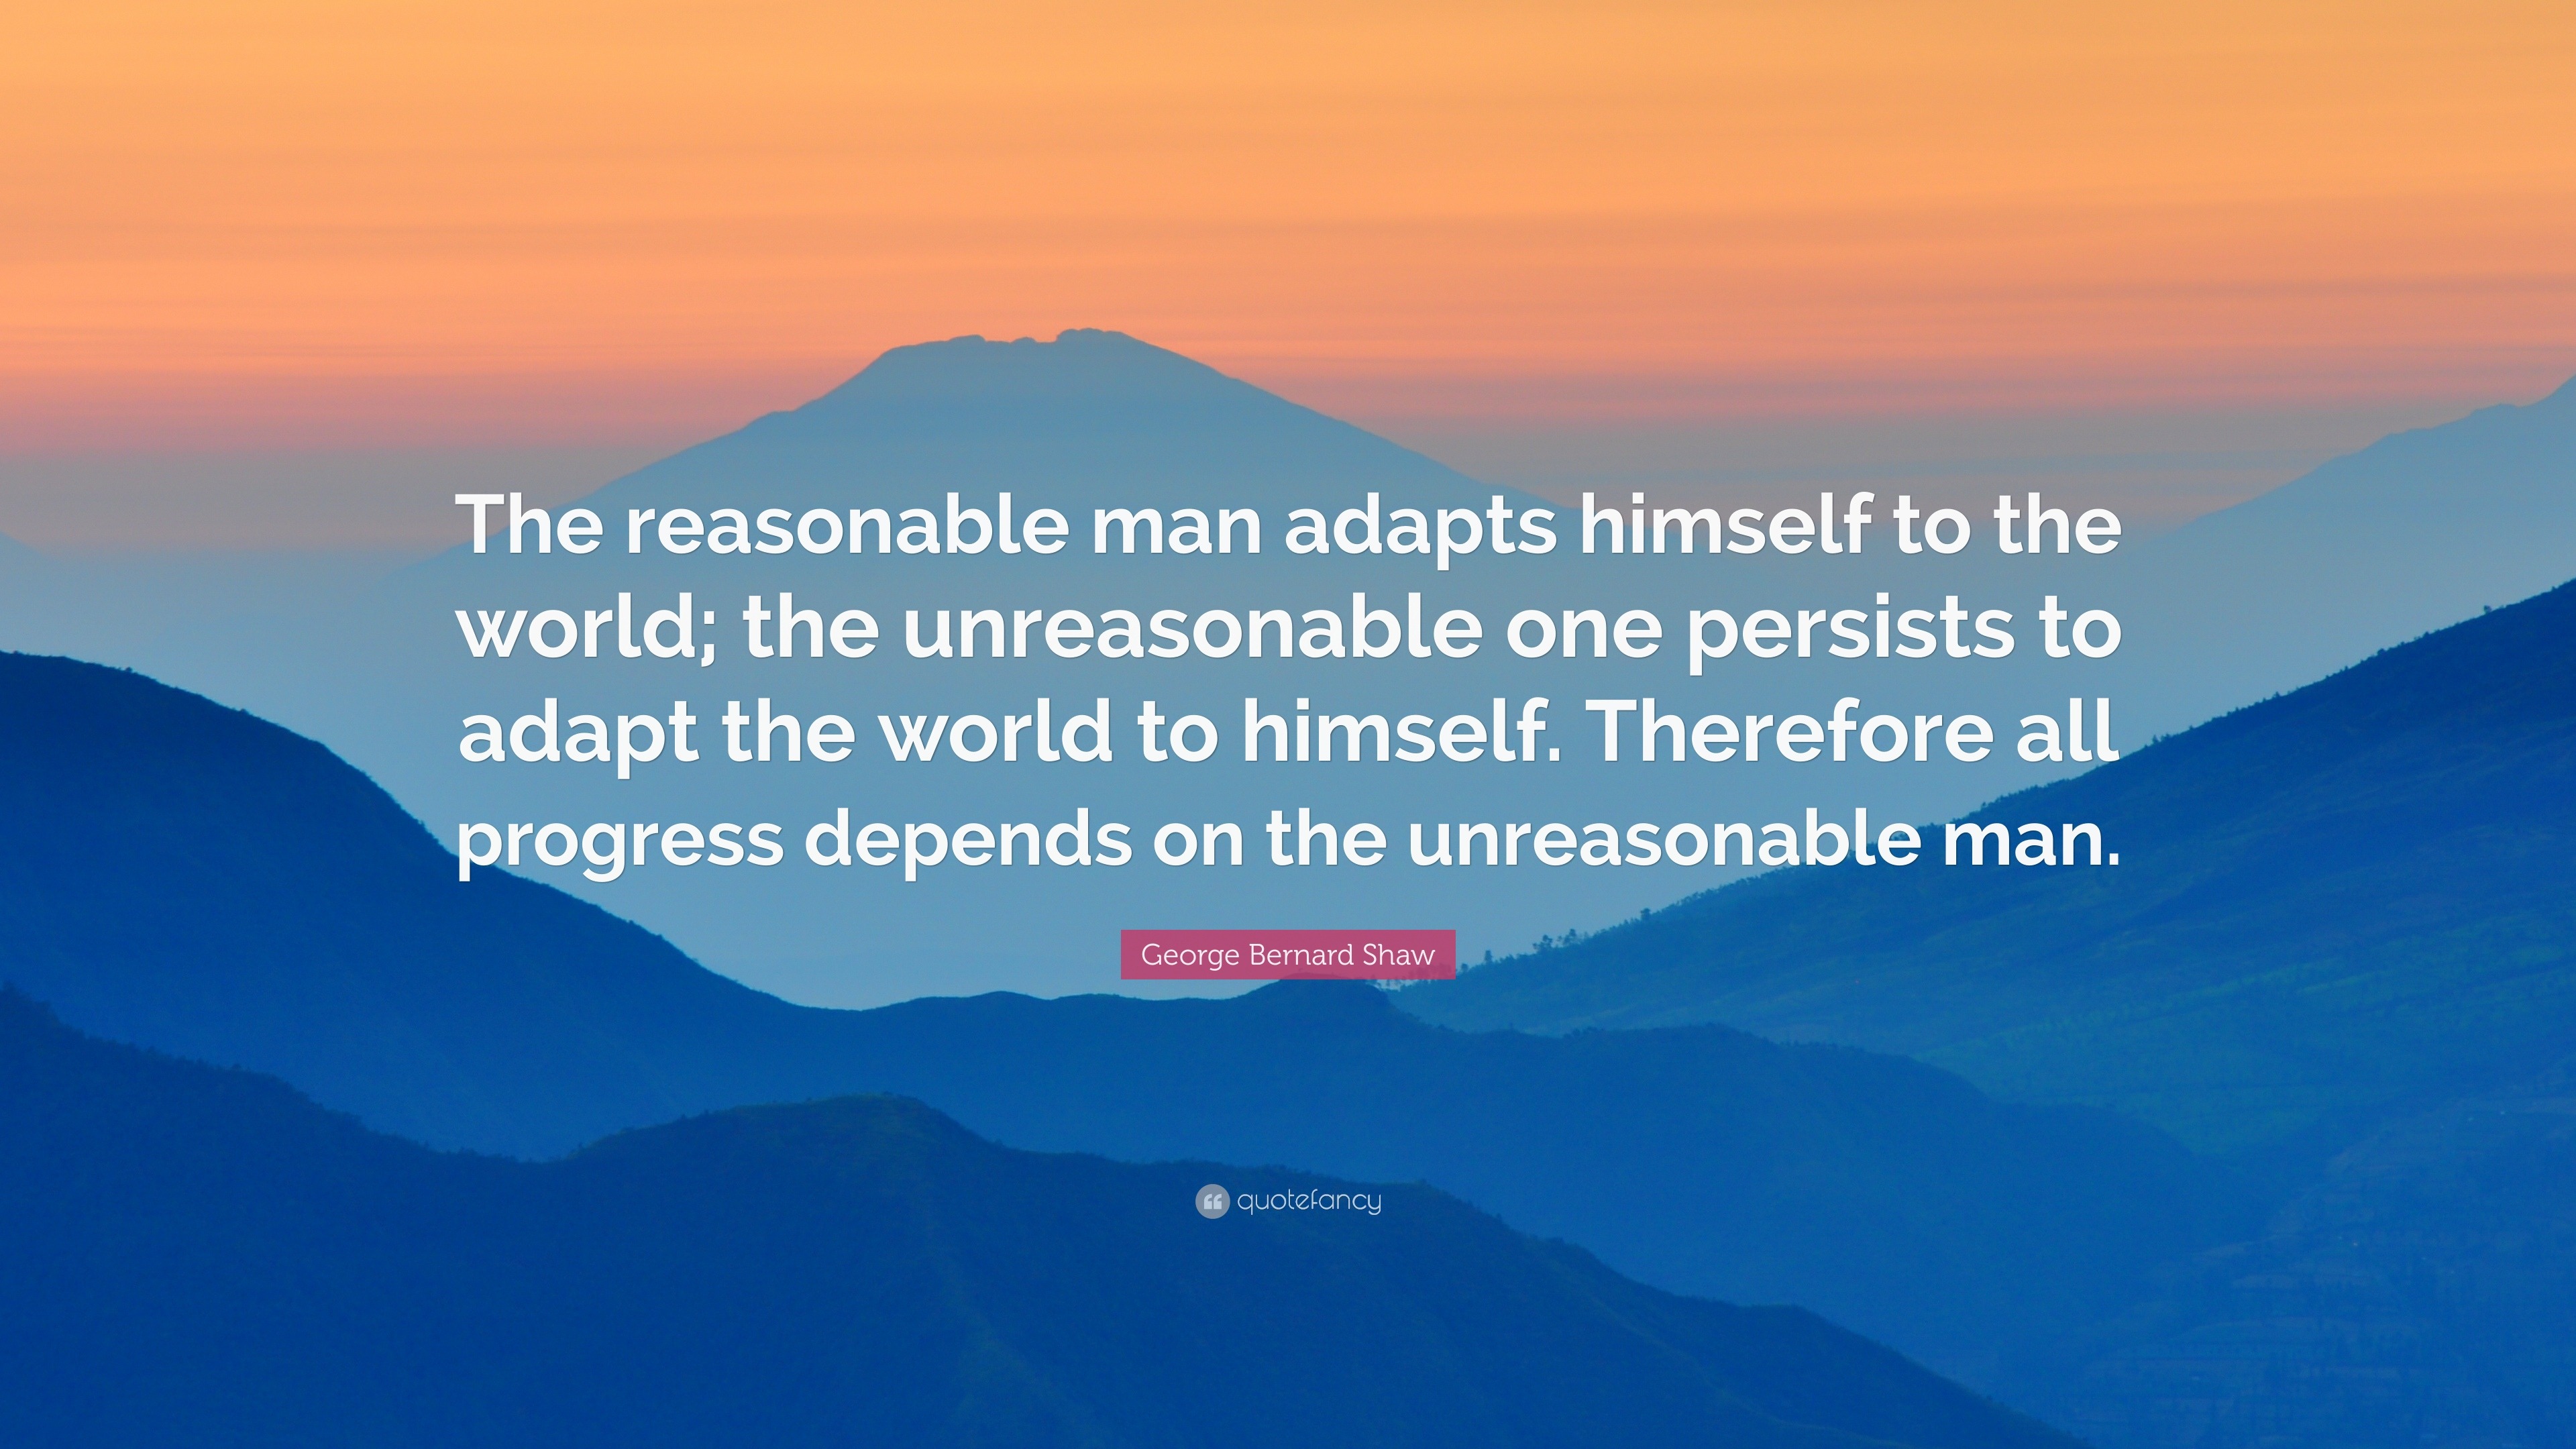 George Bernard Shaw Quote: “The reasonable man adapts himself to the